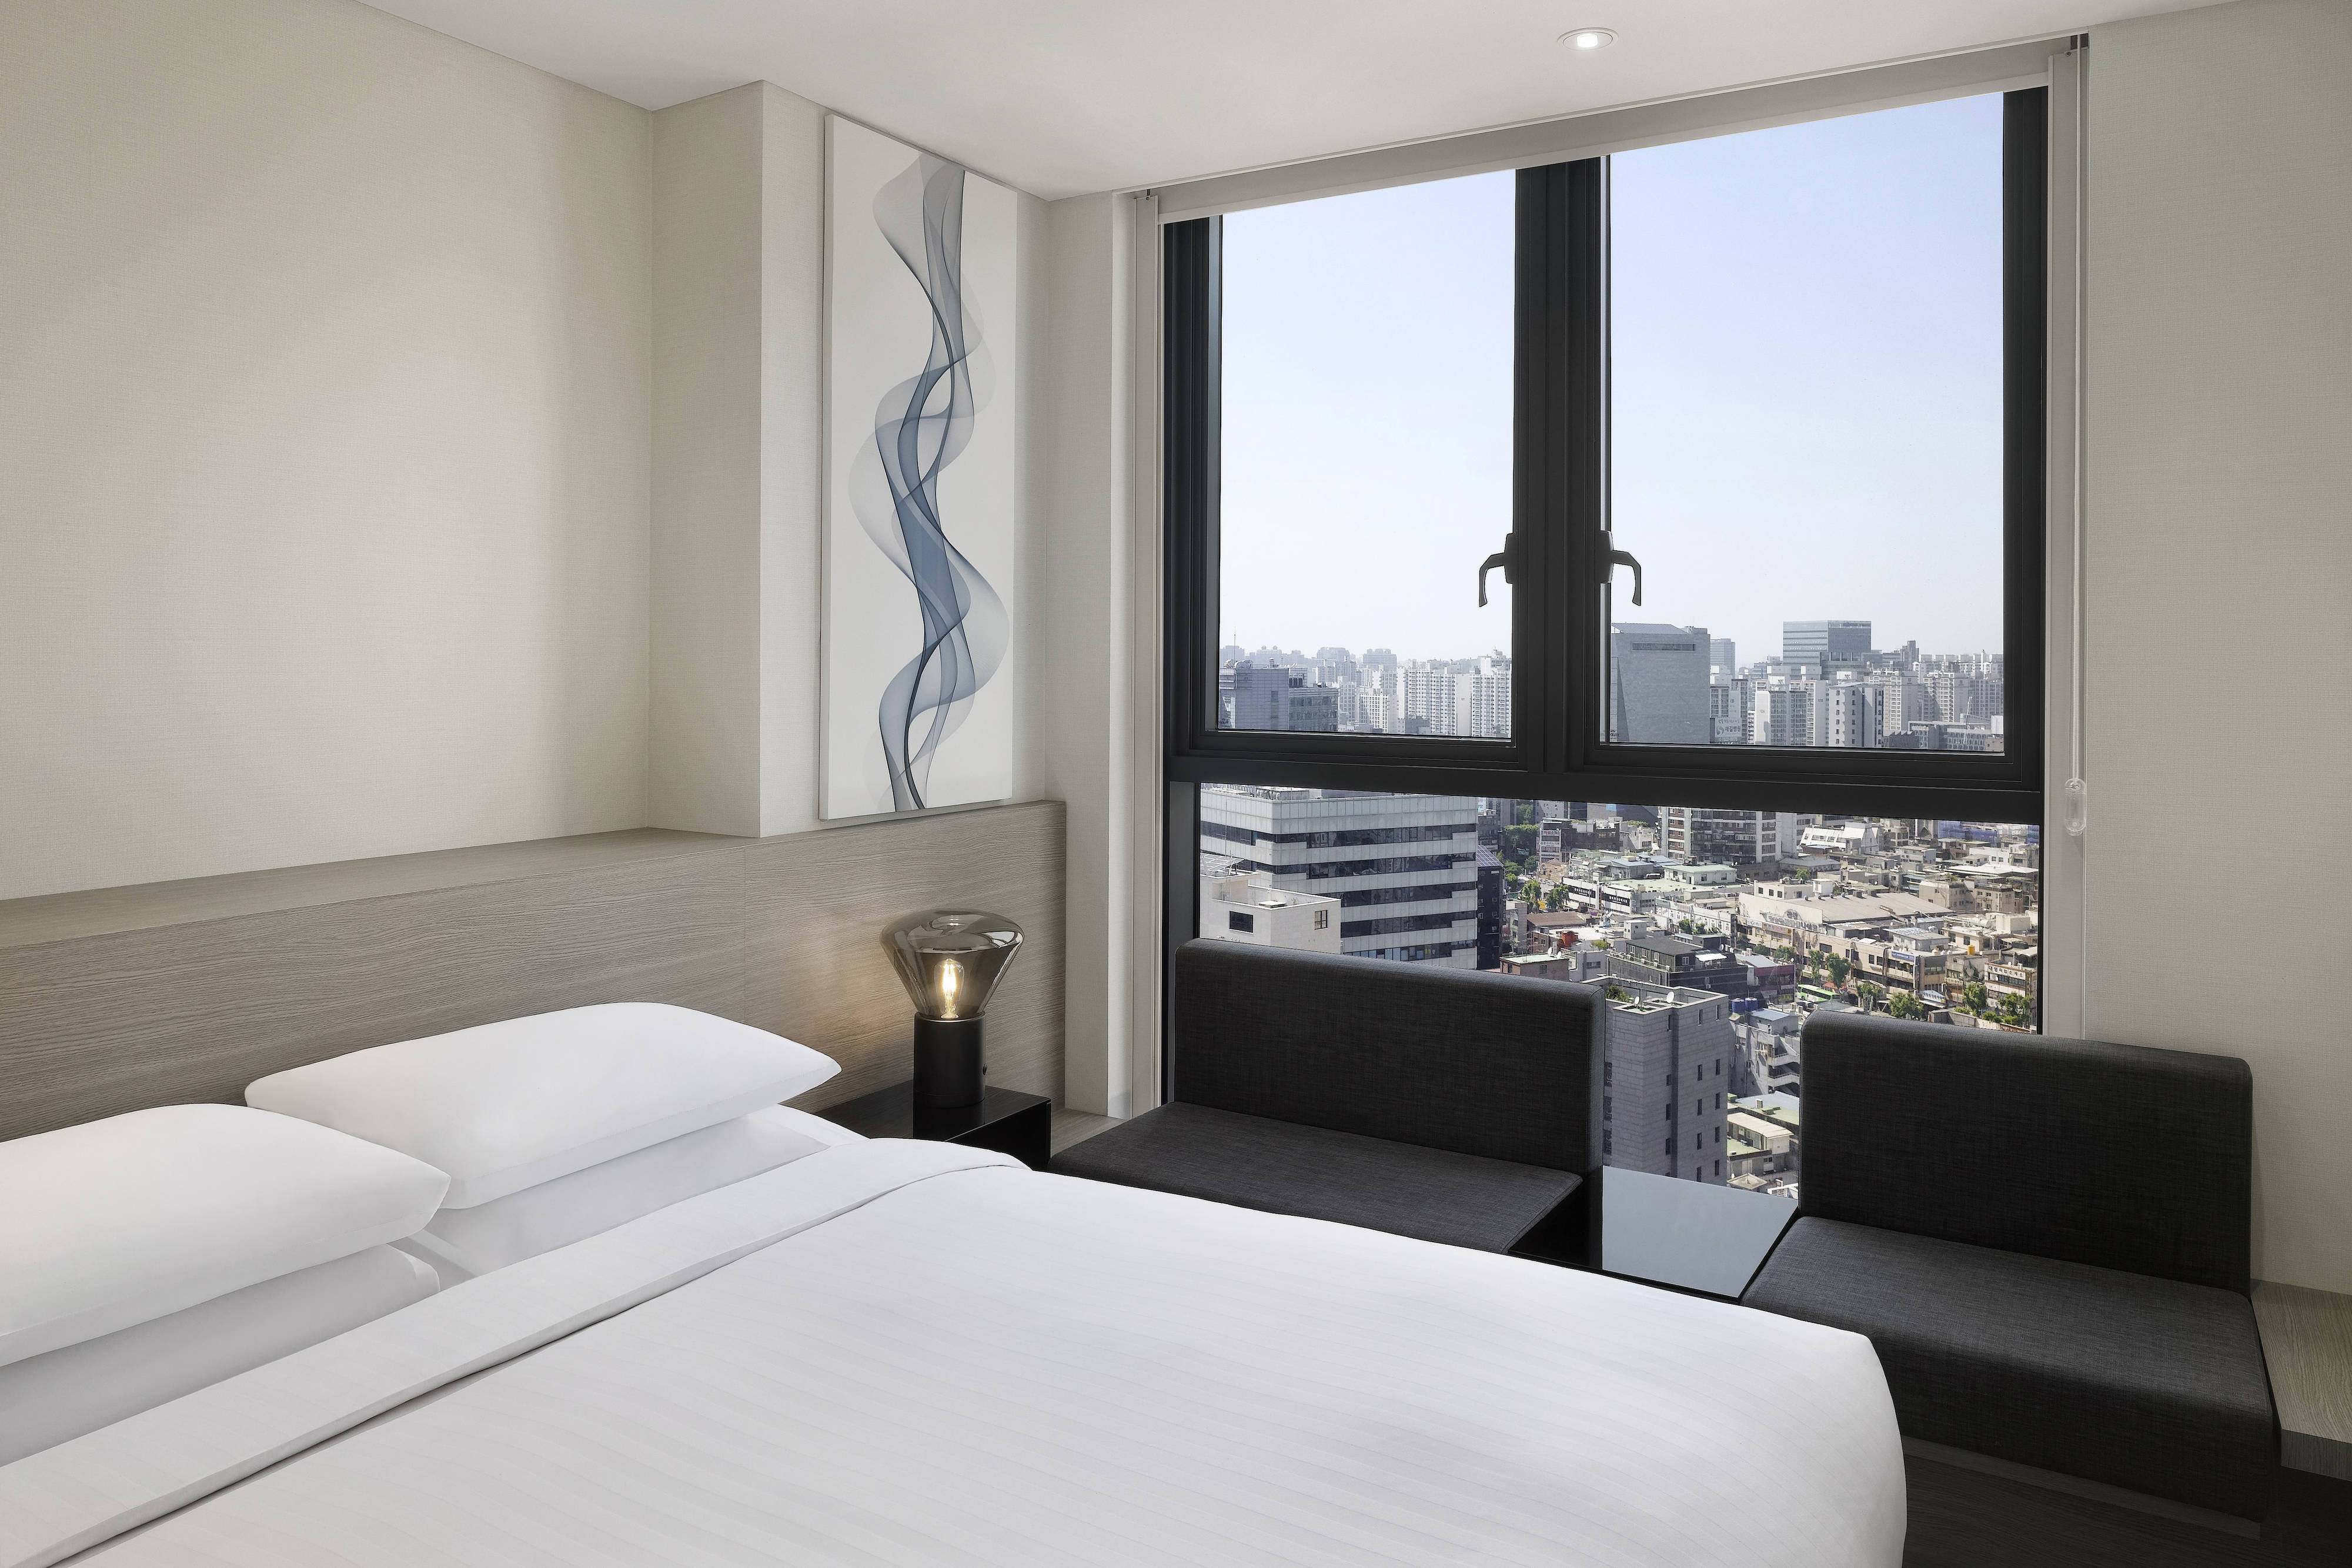 Deluxe King Guest Room - City View